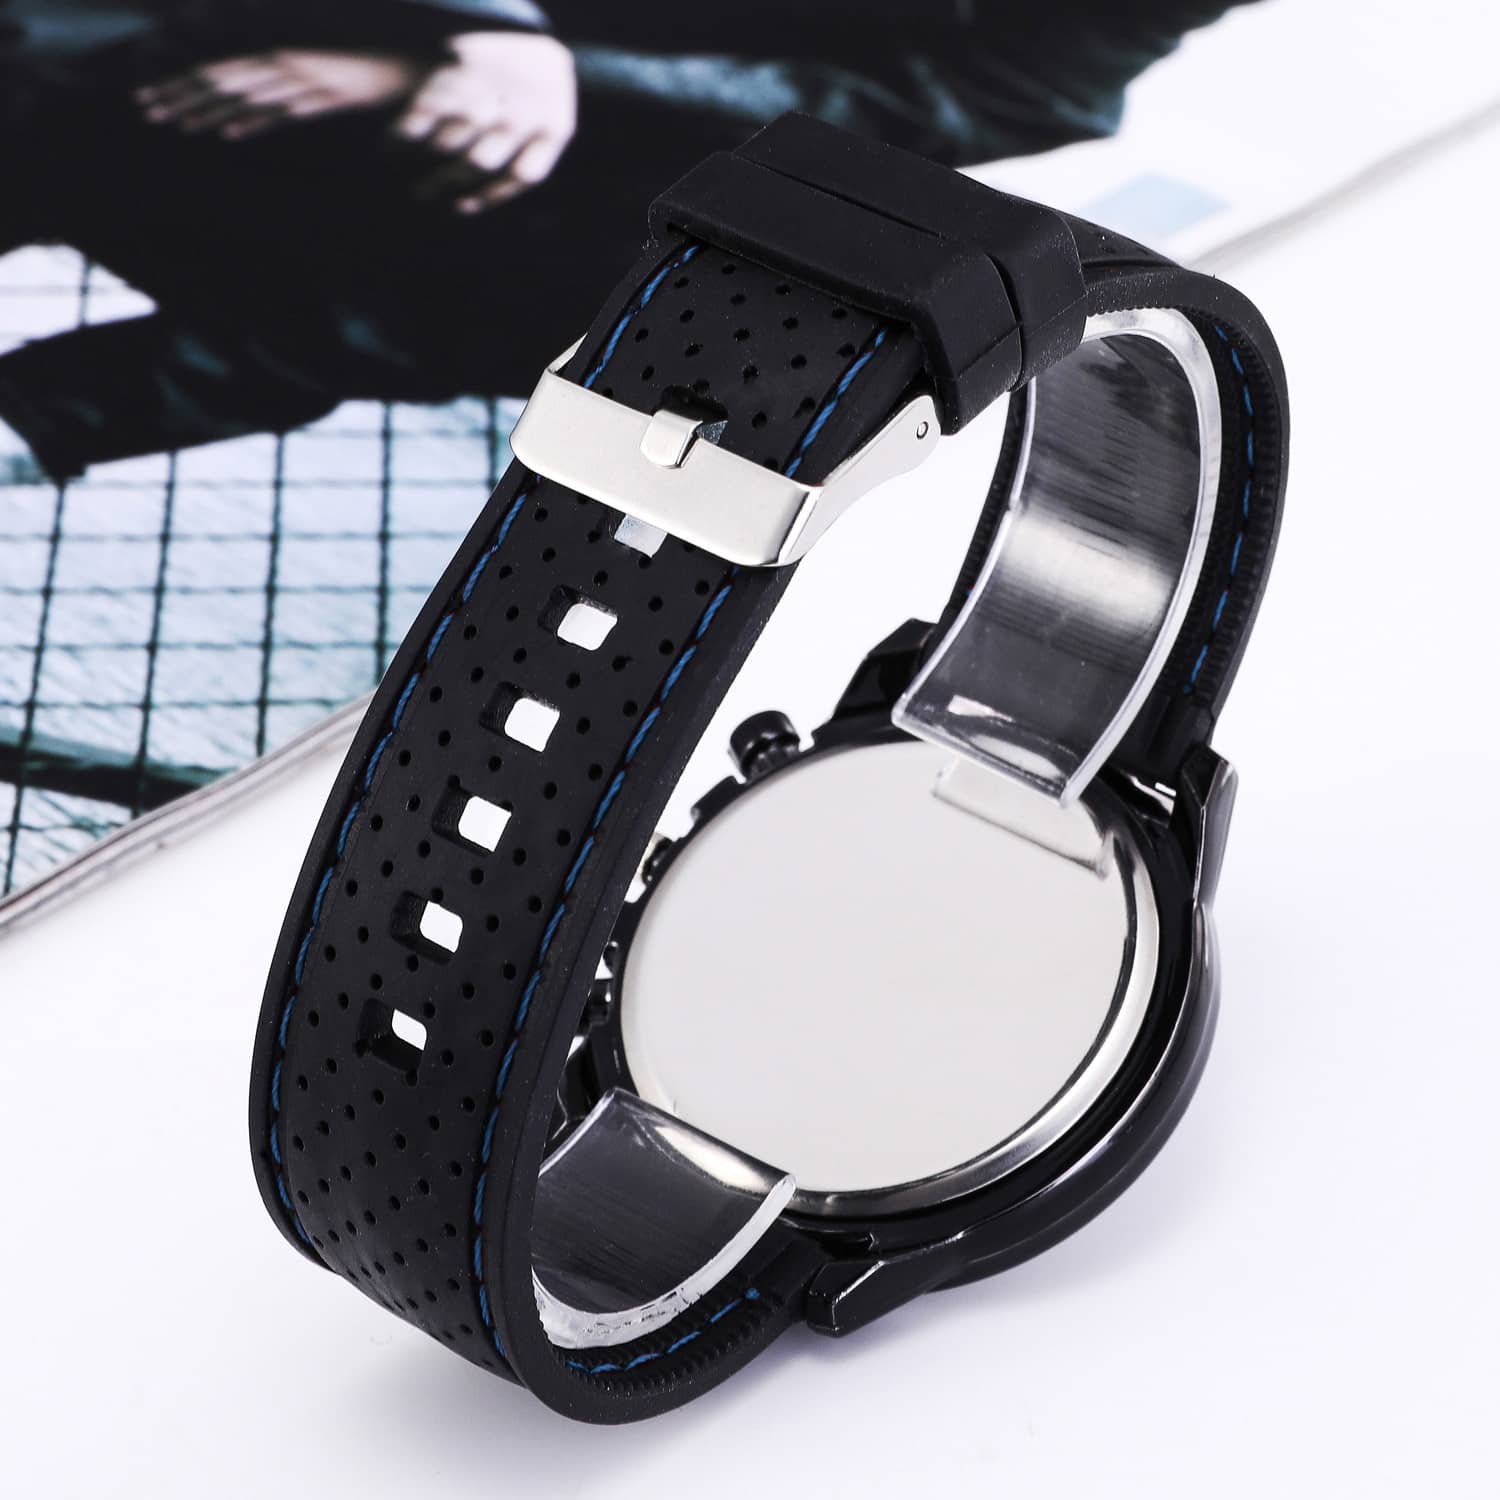 Sports Silicone Men's Watch Fashion Classic Luxury Racing Business Dial Casual Quartz Men's Watch Gifts For Men